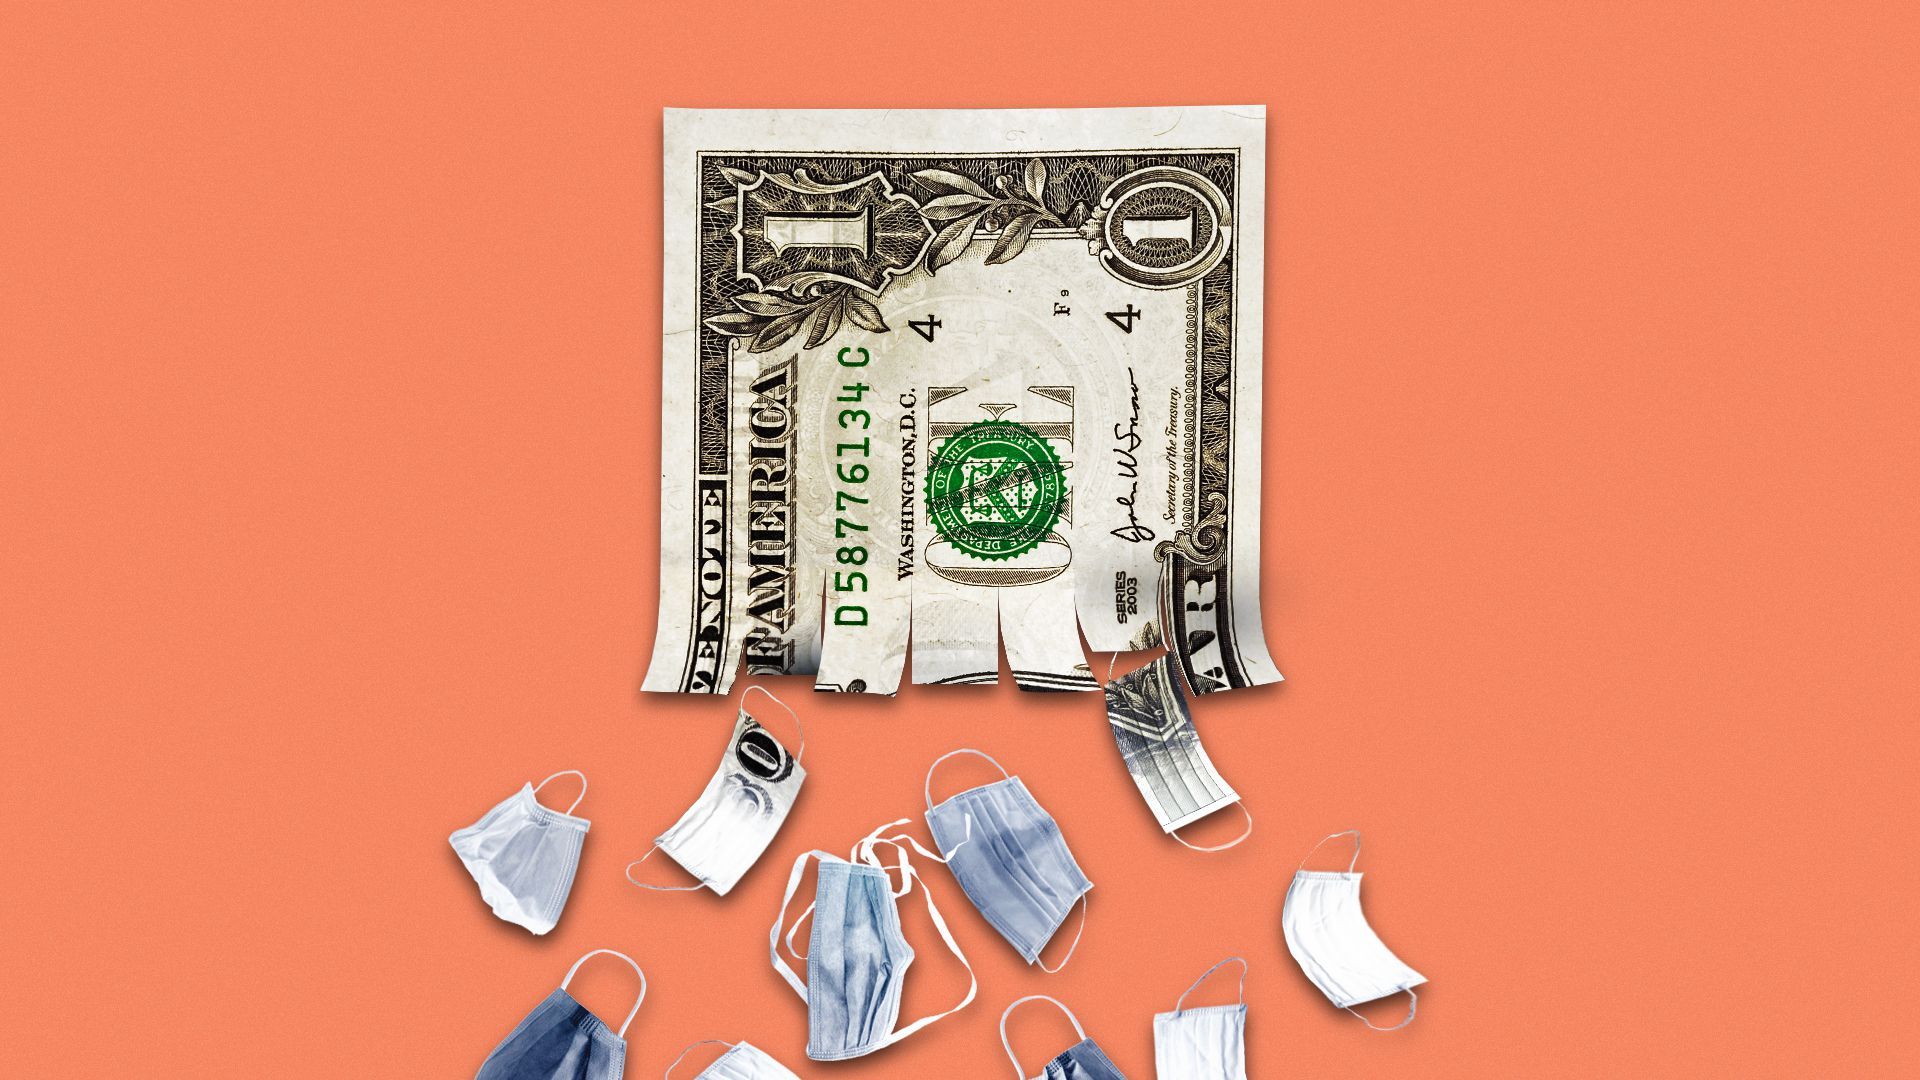 Illustration of an dollar bill shredding into pieces which appear to be face masks